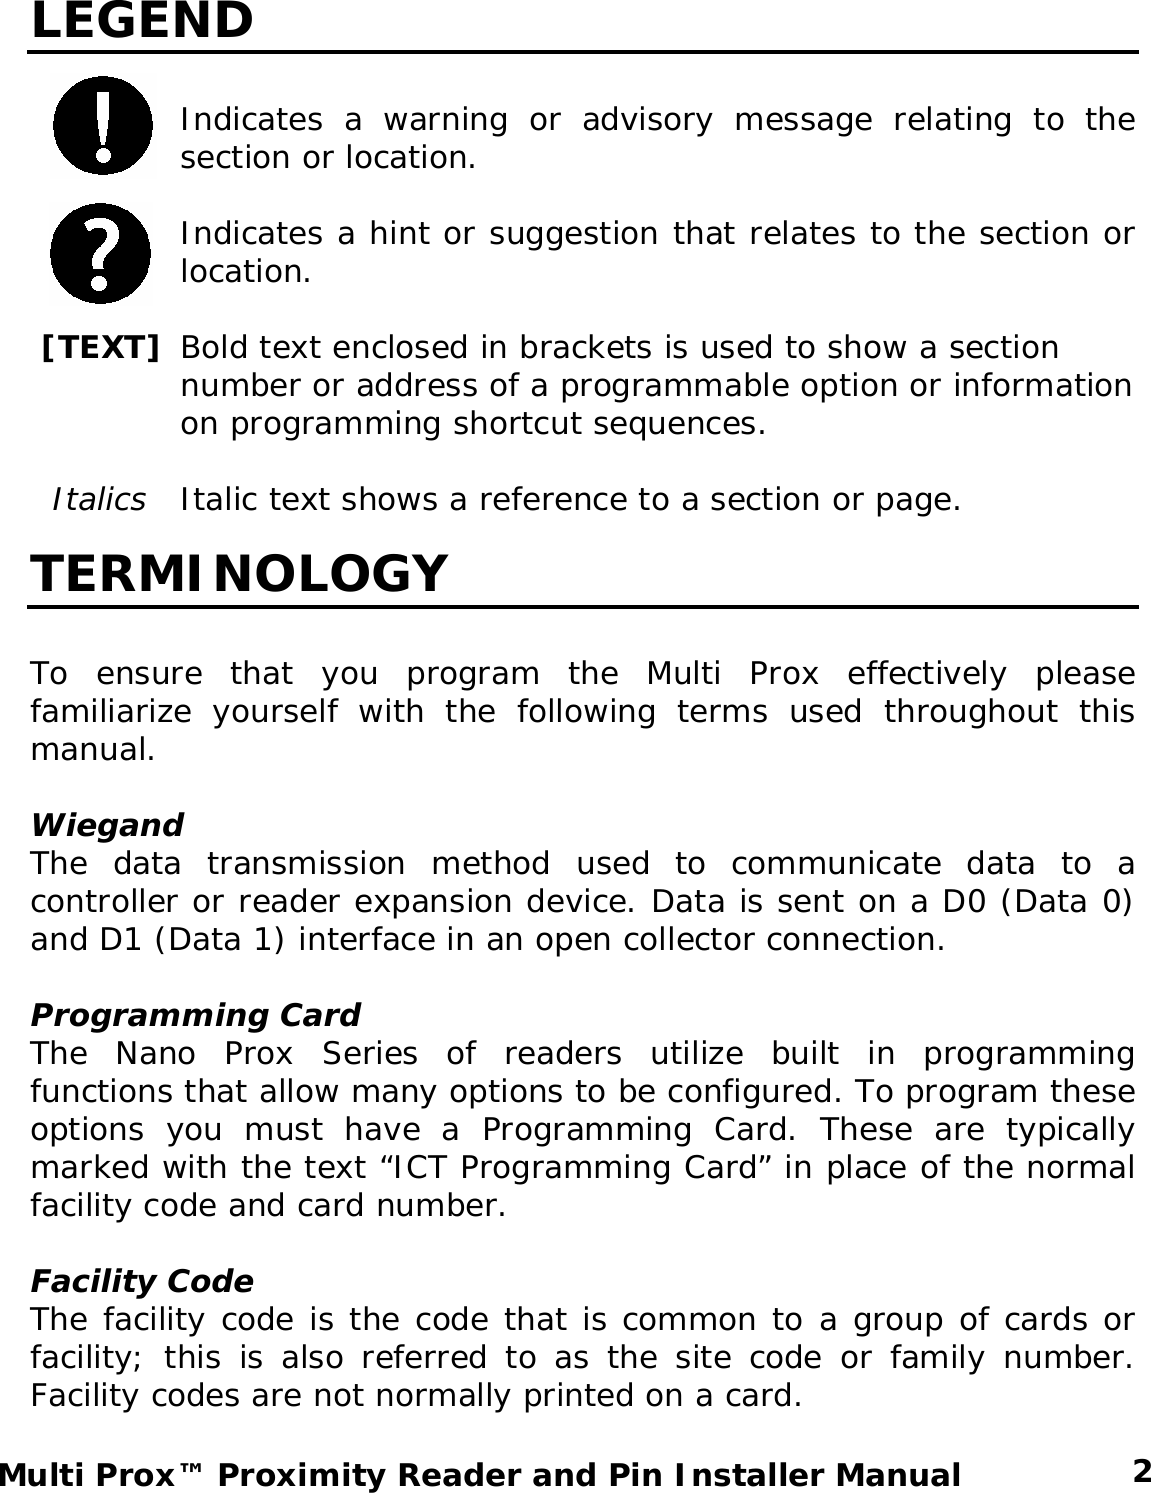 LEGEND  Indicates a warning or advisory message relating to the section or location.  Indicates a hint or suggestion that relates to the section or location.   [TEXT] Bold text enclosed in brackets is used to show a section number or address of a programmable option or information on programming shortcut sequences.    Italics  Italic text shows a reference to a section or page. TERMINOLOGY  To ensure that you program the Multi Prox effectively please familiarize yourself with the following terms used throughout this manual.  Wiegand The data transmission method used to communicate data to a controller or reader expansion device. Data is sent on a D0 (Data 0) and D1 (Data 1) interface in an open collector connection.   Programming Card The Nano Prox Series of readers utilize built in programming functions that allow many options to be configured. To program these options you must have a Programming Card. These are typically marked with the text “ICT Programming Card” in place of the normal facility code and card number.  Facility Code The facility code is the code that is common to a group of cards or facility; this is also referred to as the site code or family number. Facility codes are not normally printed on a card.   2 Multi Prox™ Proximity Reader and Pin Installer Manual 